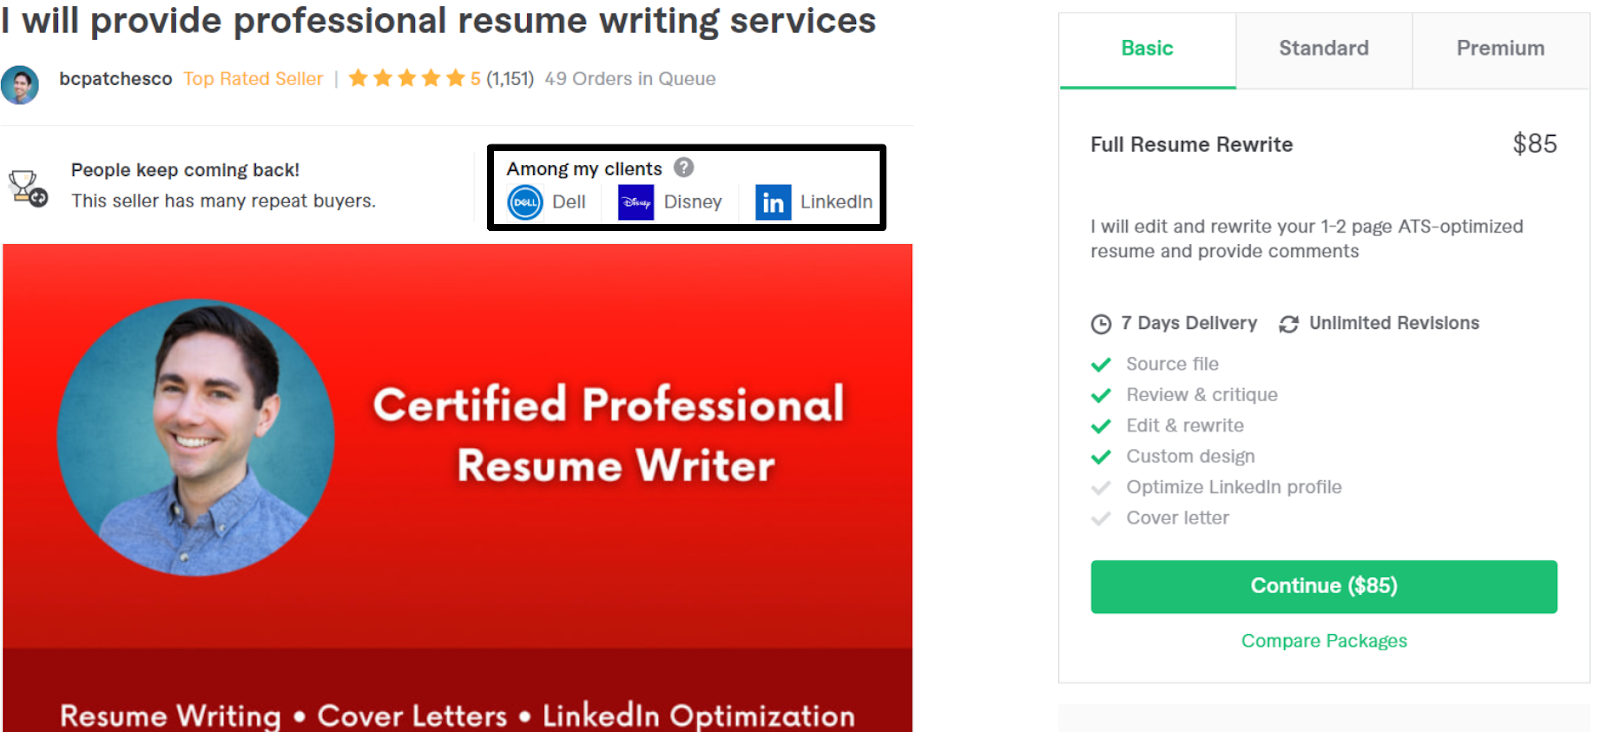 Bcpatchesco's resume writing service gig on Fiverr